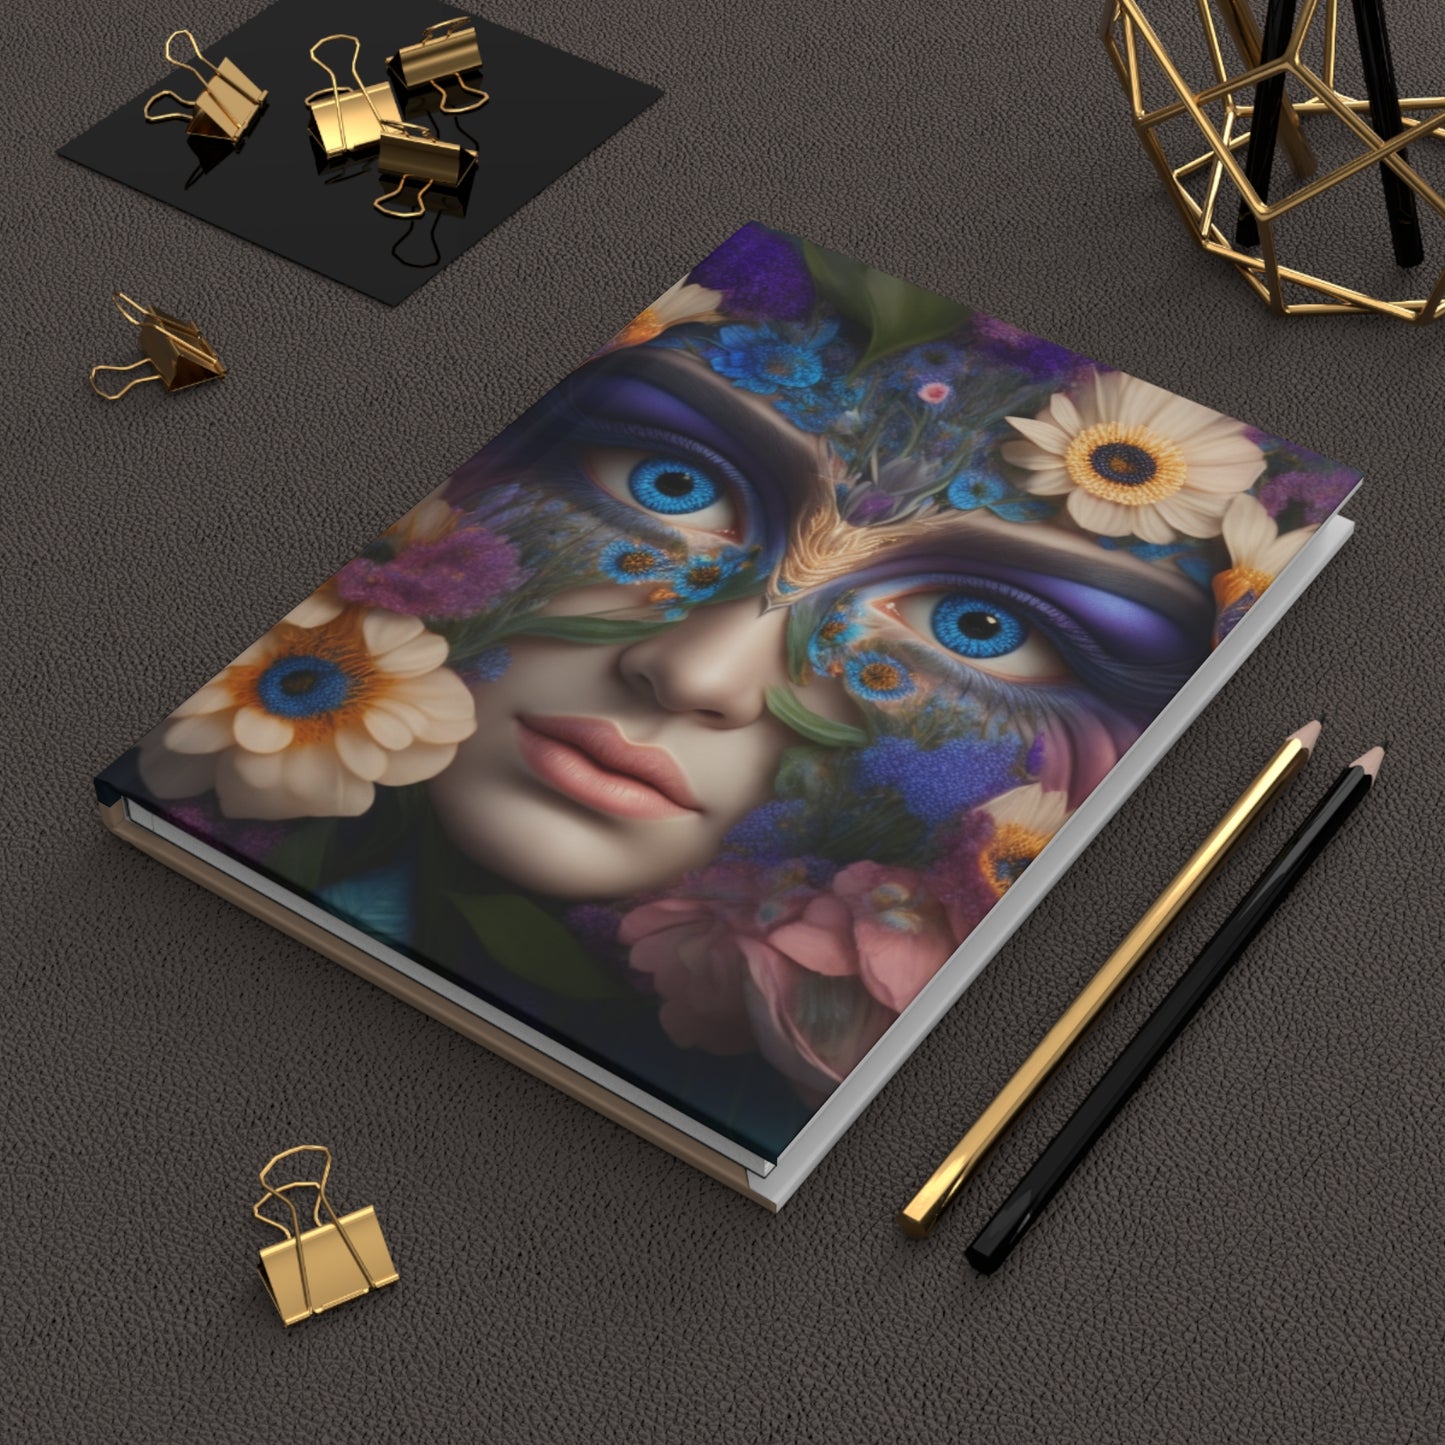 Mystical Female Hardcover Notebook with Flower Facemask | Wellness Journal, Dream Diary, Self-Care & Gratitude, Lined or Blank Pages